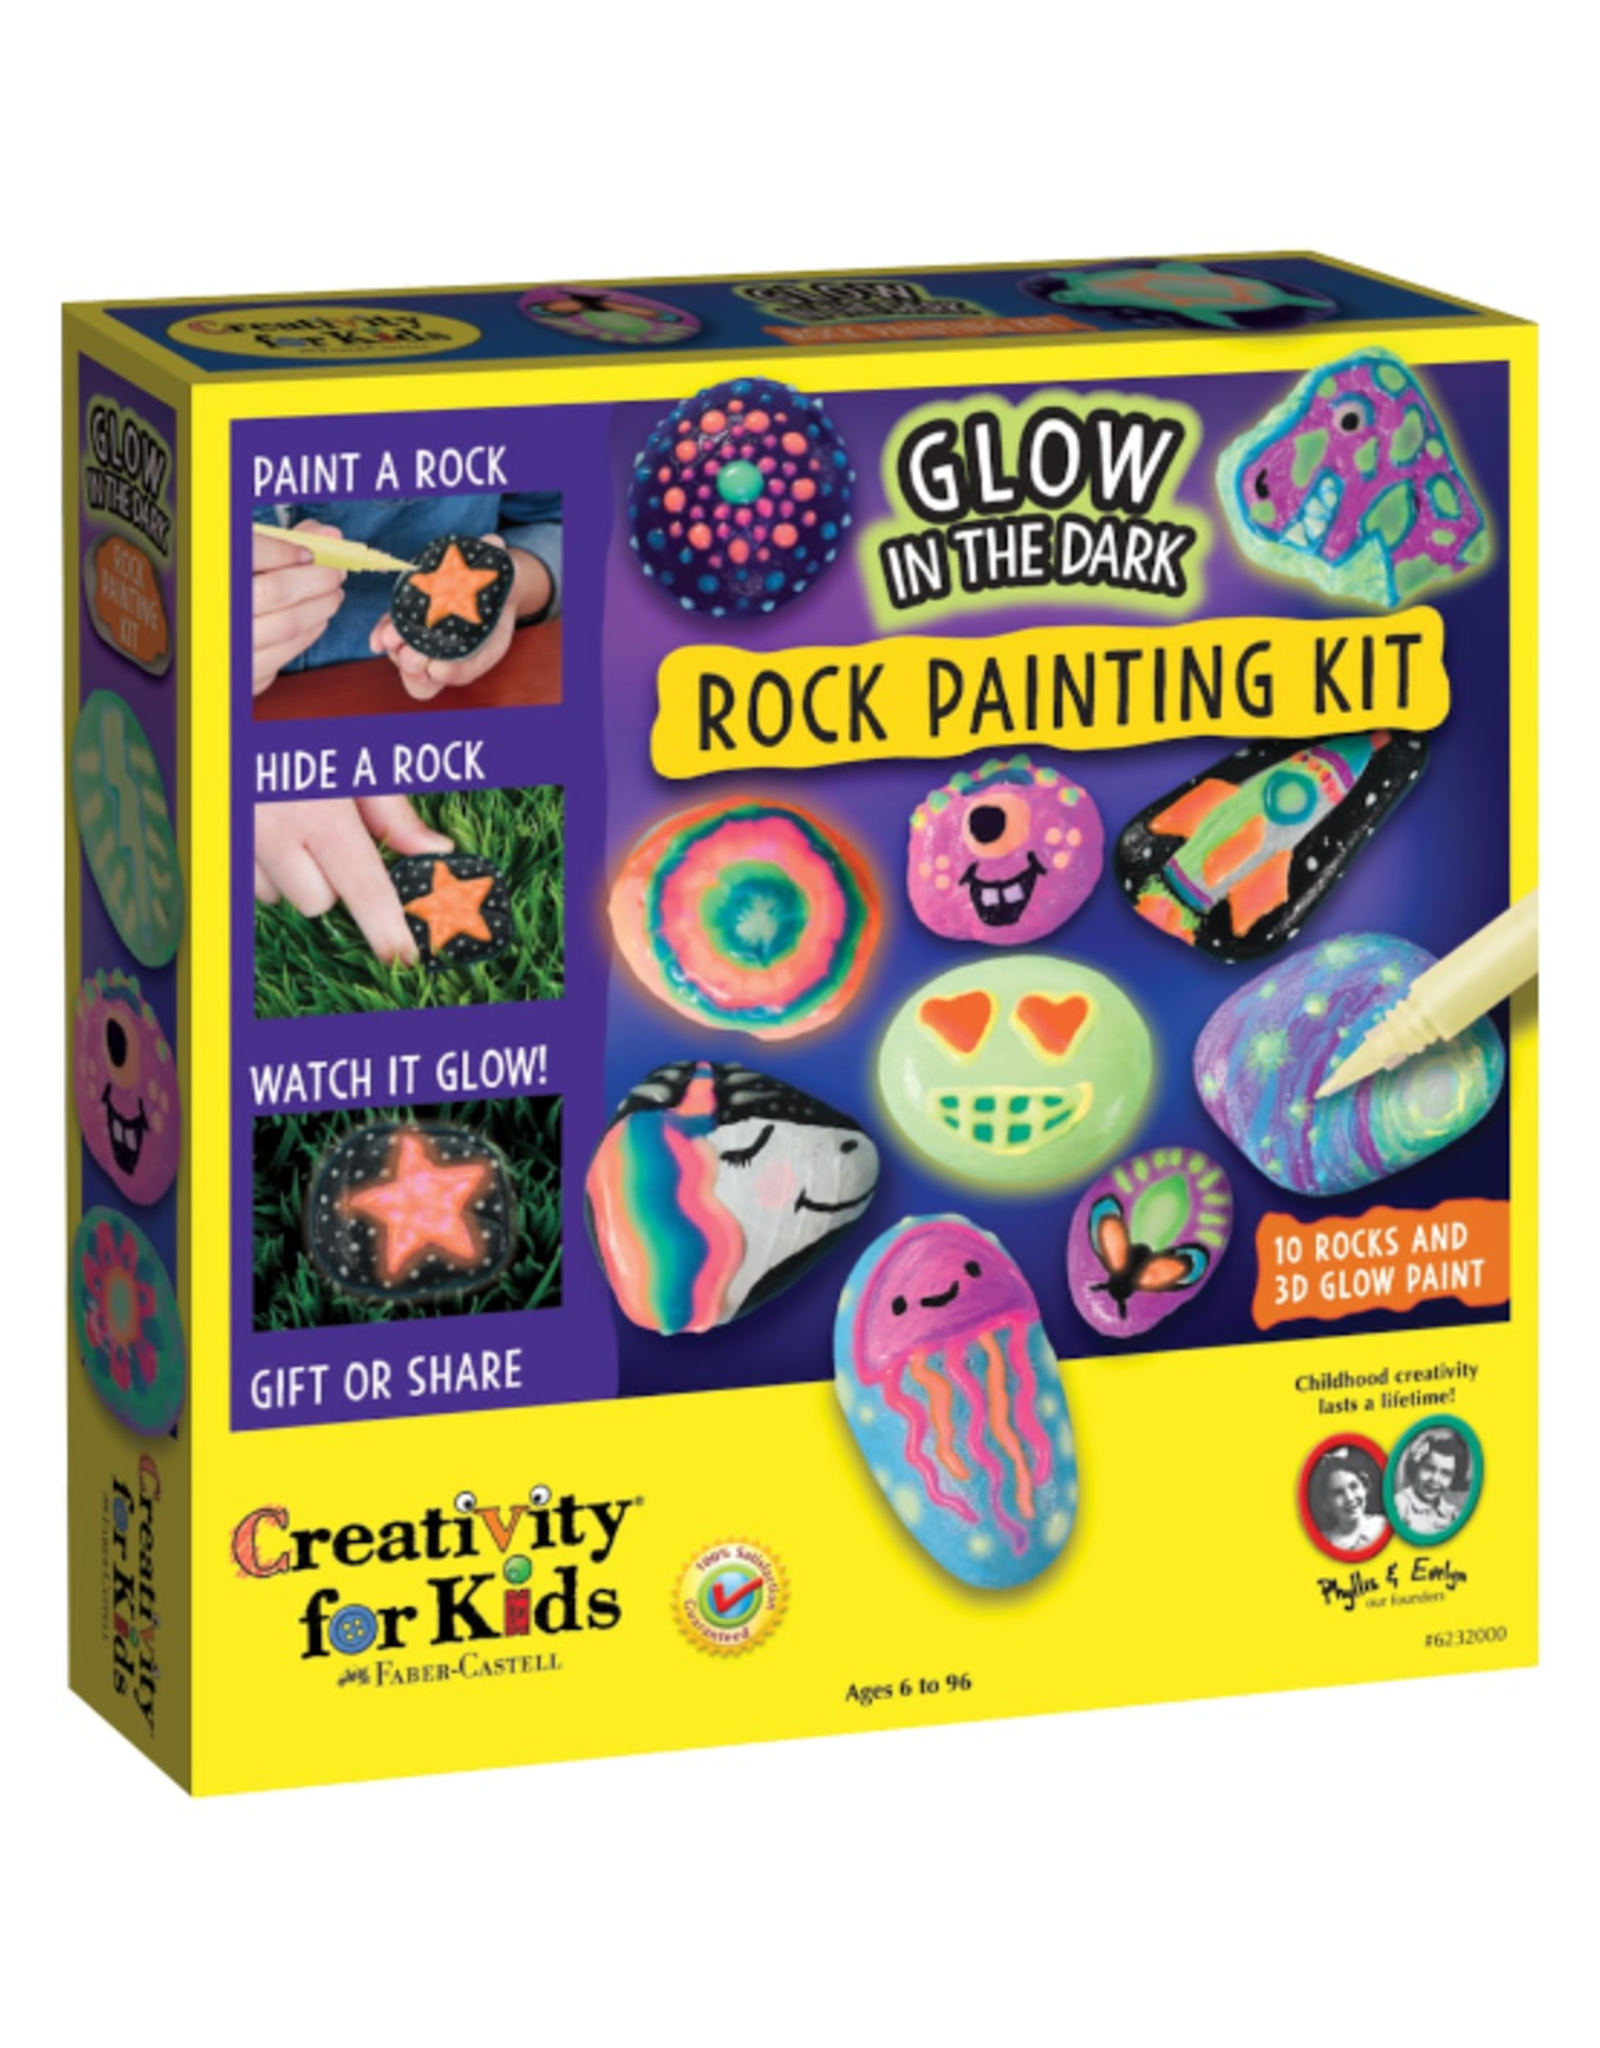 Creativity for Kids Creativity for Kids - Glow in the Dark Rock Painting kit